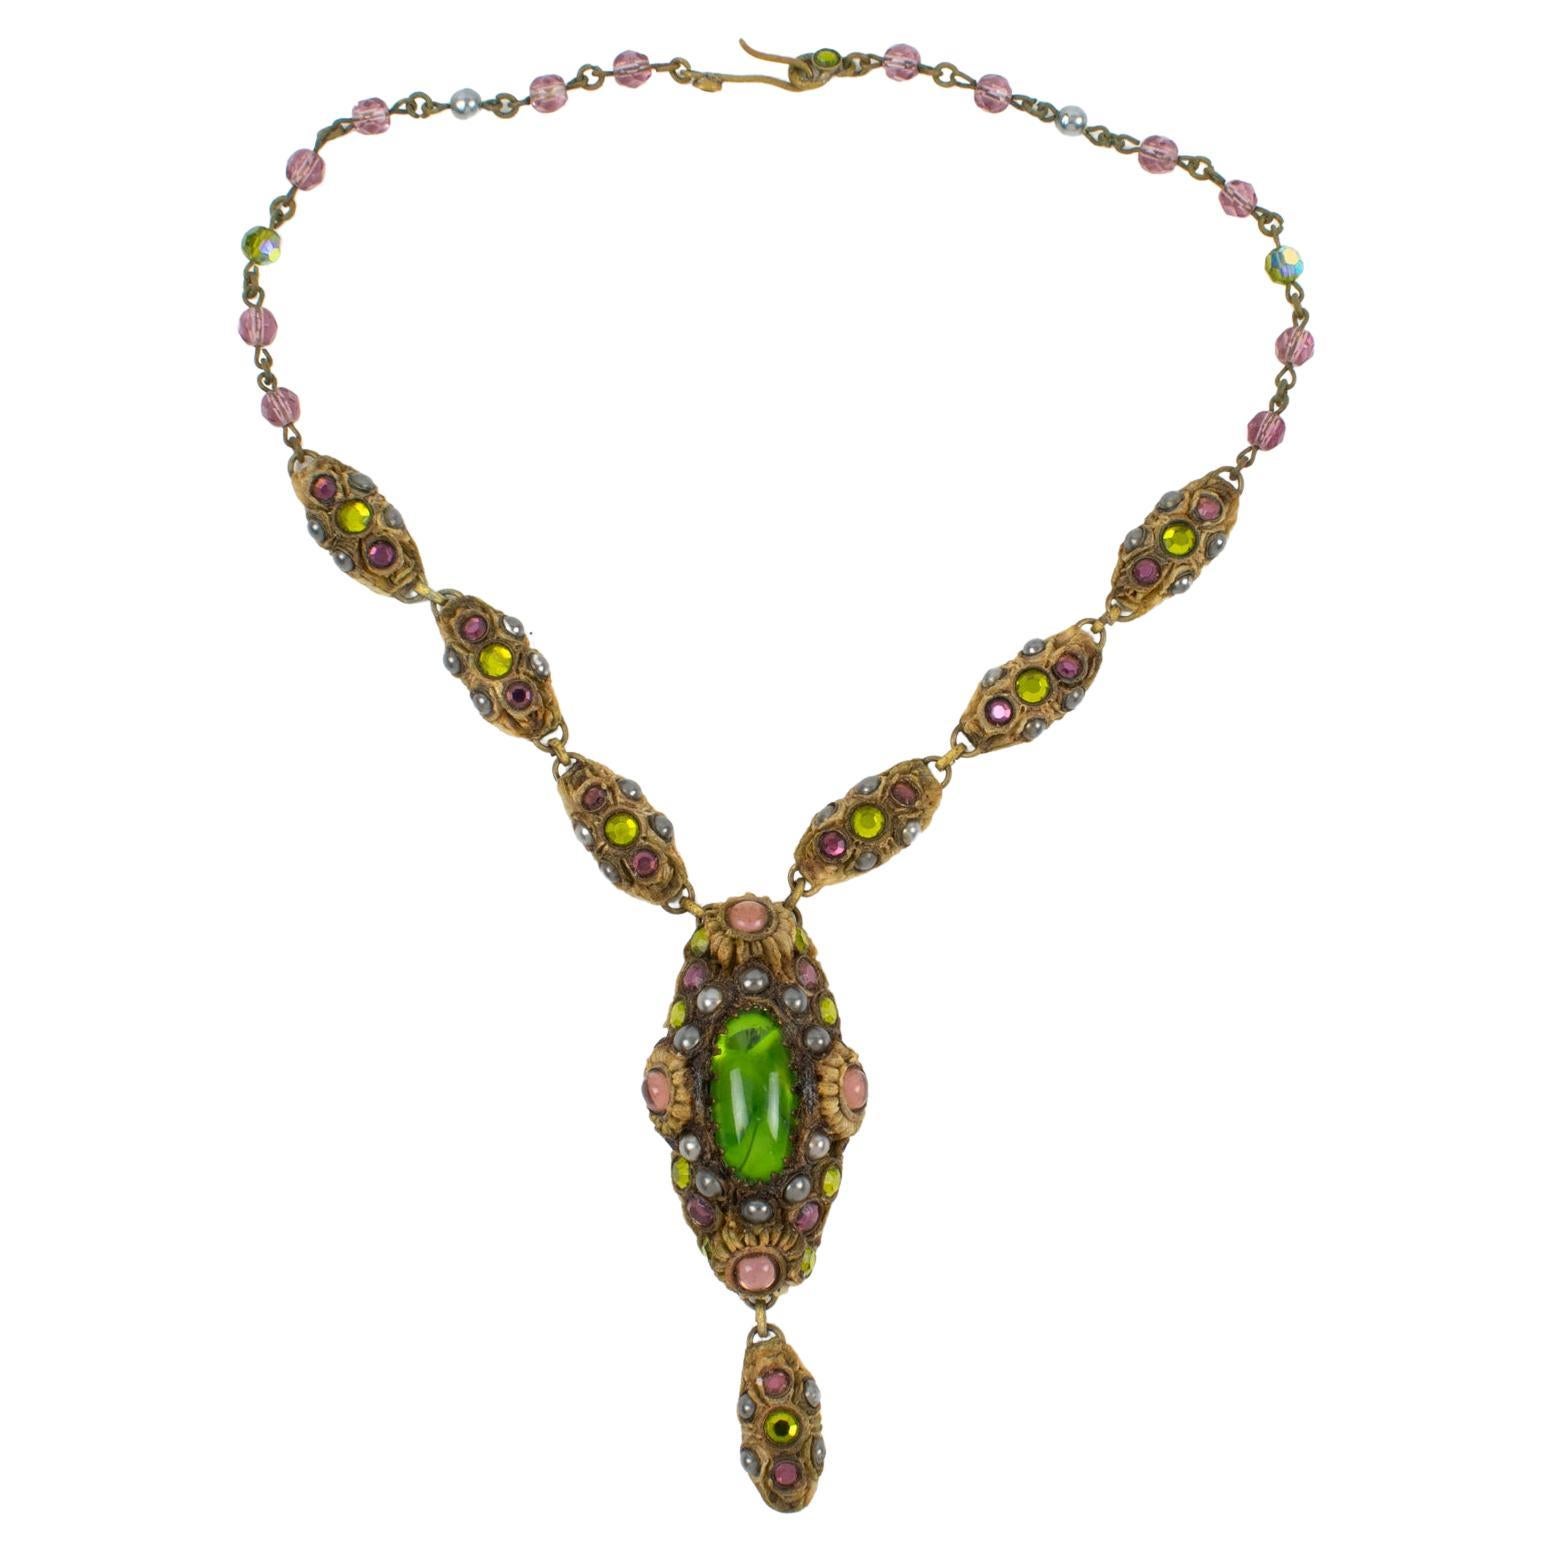 Henry Perichon Talosel Resin Choker Necklace with Green and Purple Cabochons